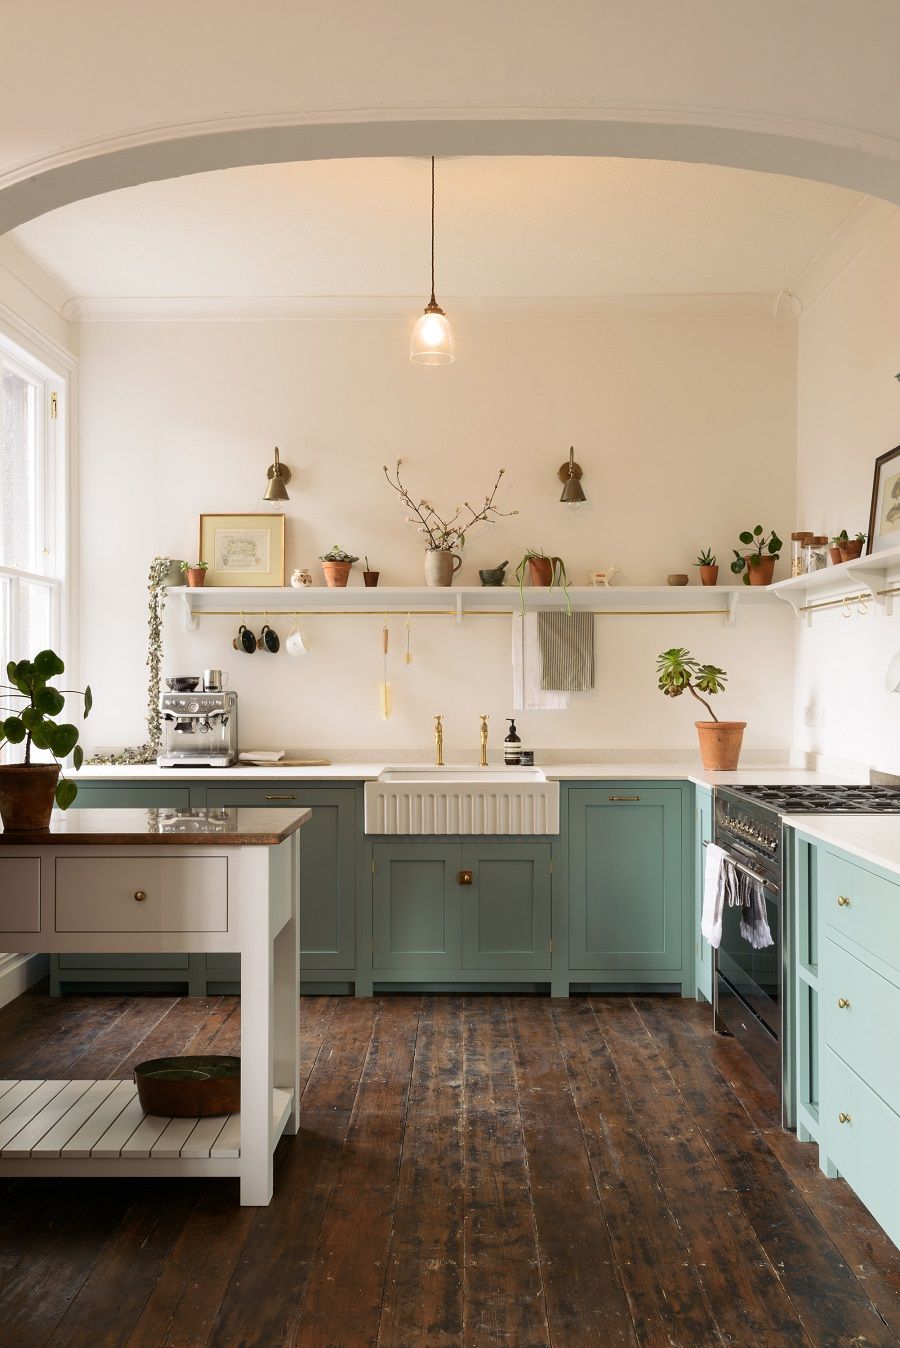 a-delightfully-simple-kitchen-in-an-edwardian-villa-that-evokes-a-different-era-8